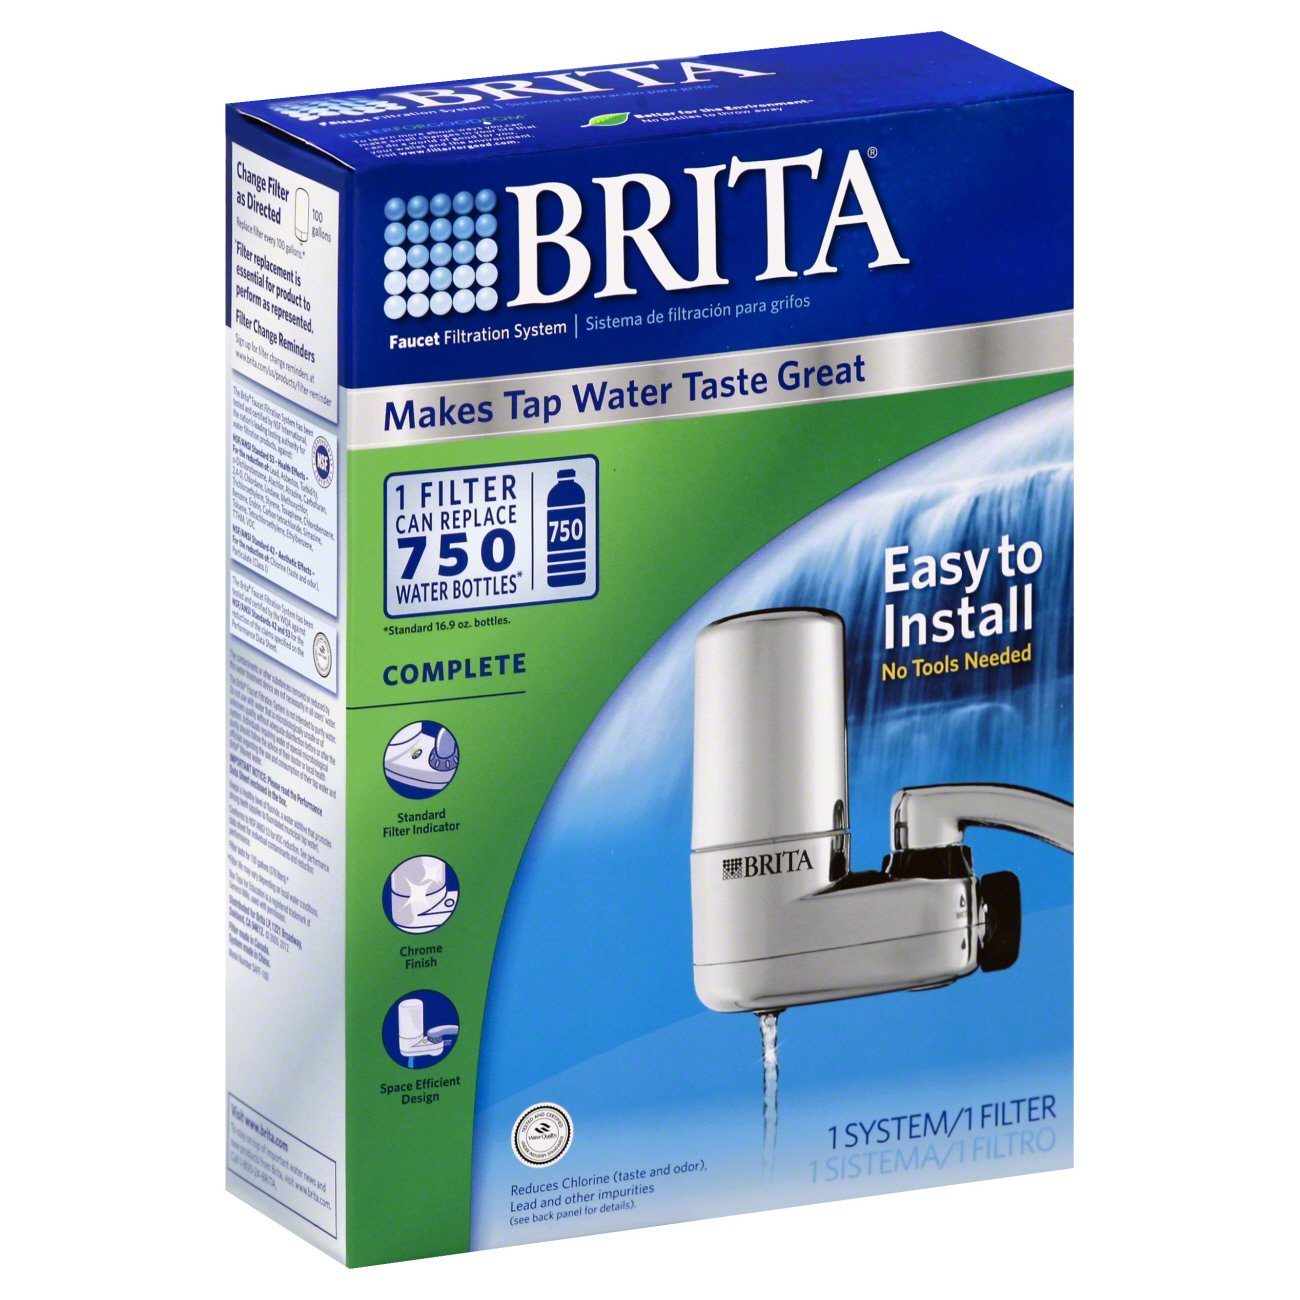 Brita Chrome On Tap Water Filtration System Shop Appliances At H E B